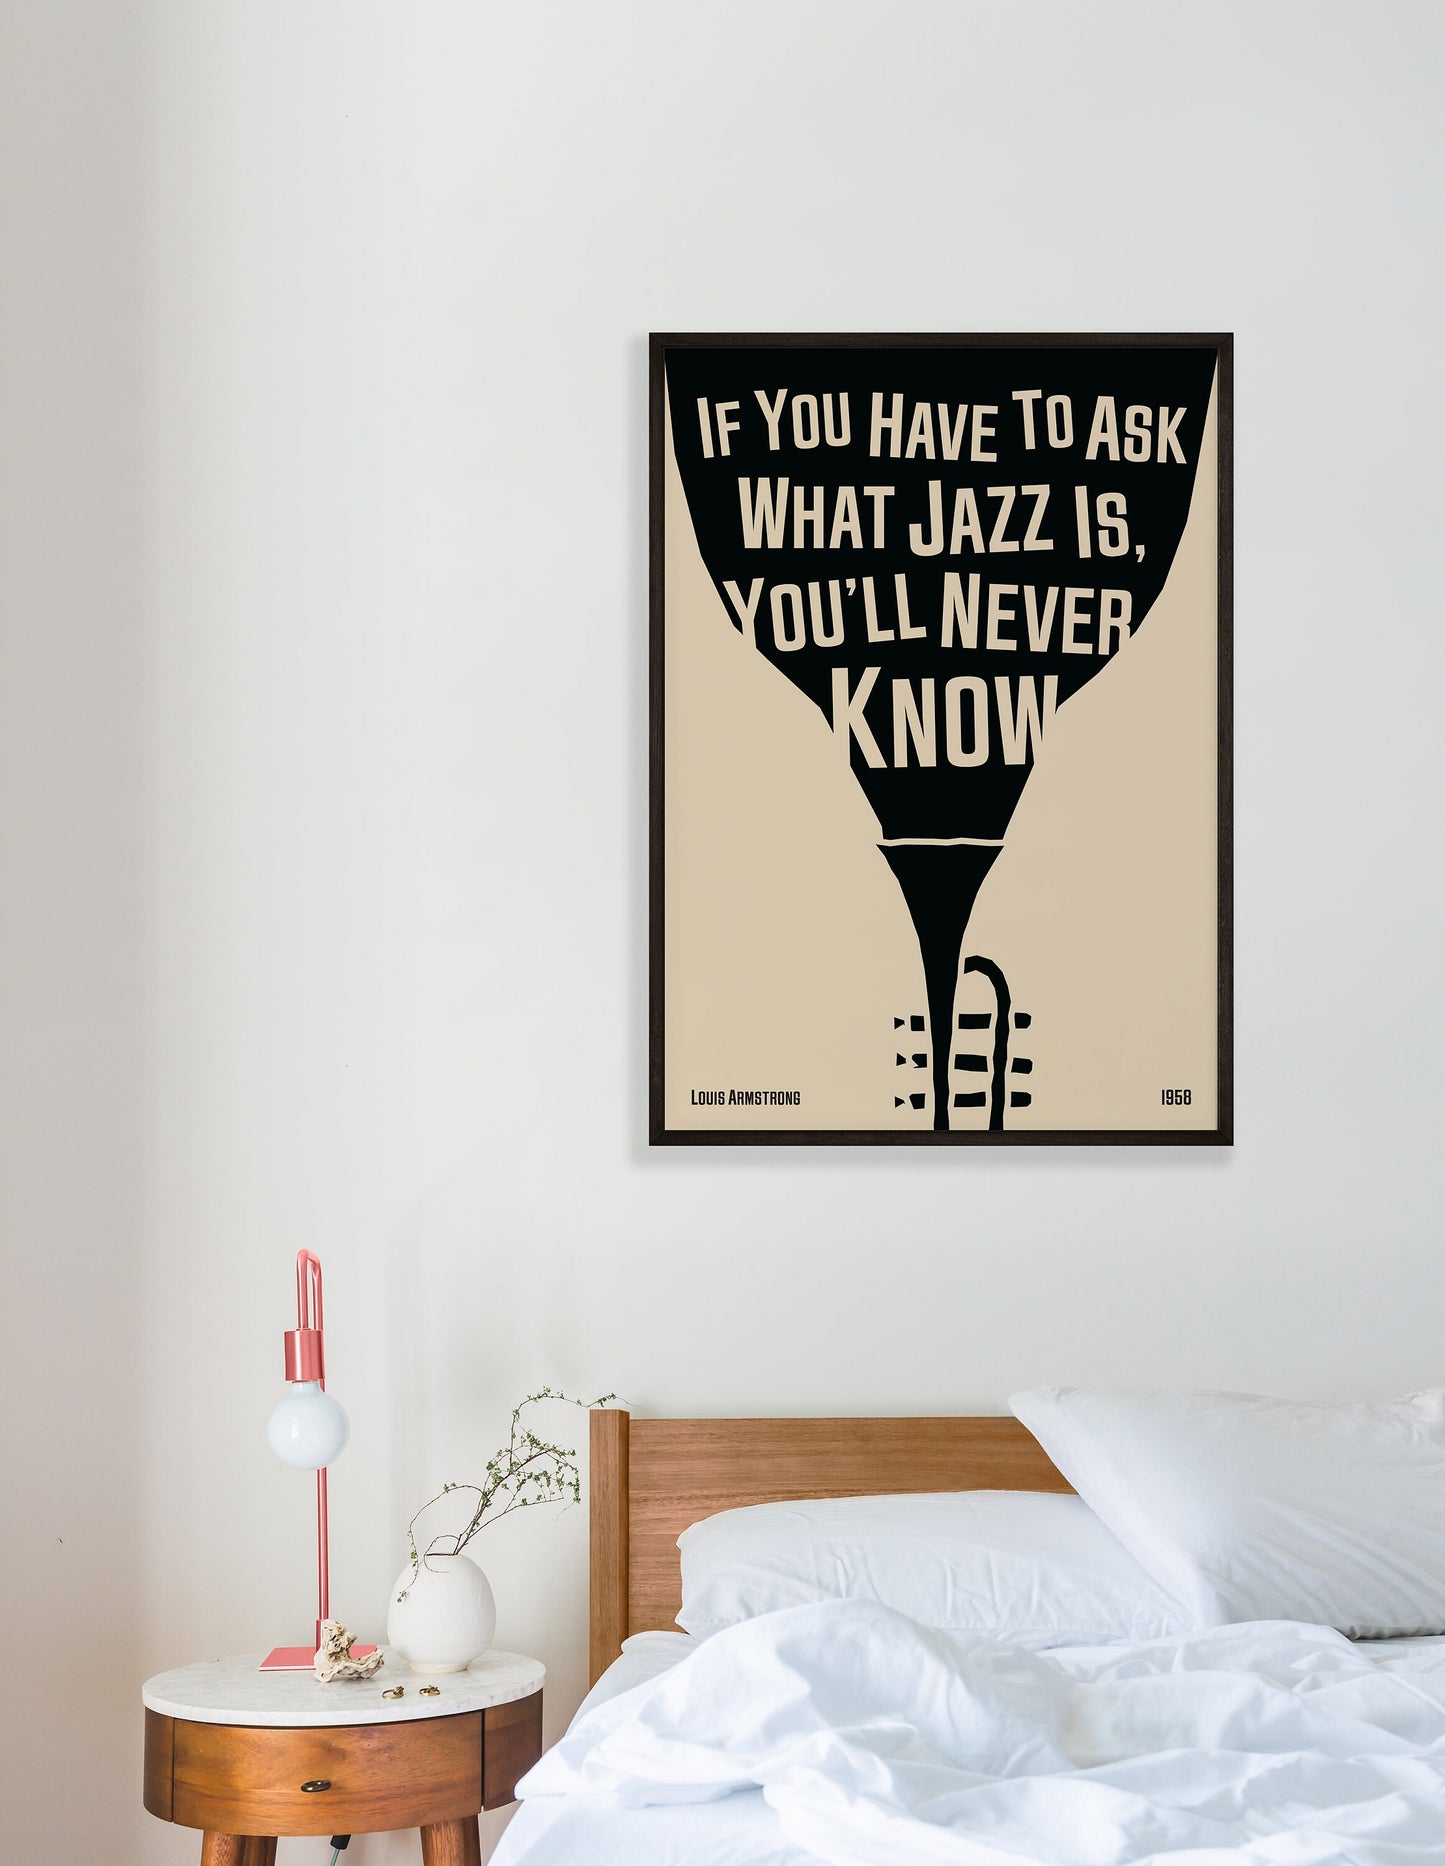 Cool jazz music poster with trumpet design, featuring a Louis Armstrong quote. Retro black frame print, hanging o a white bedroom wall, perfect home decor.